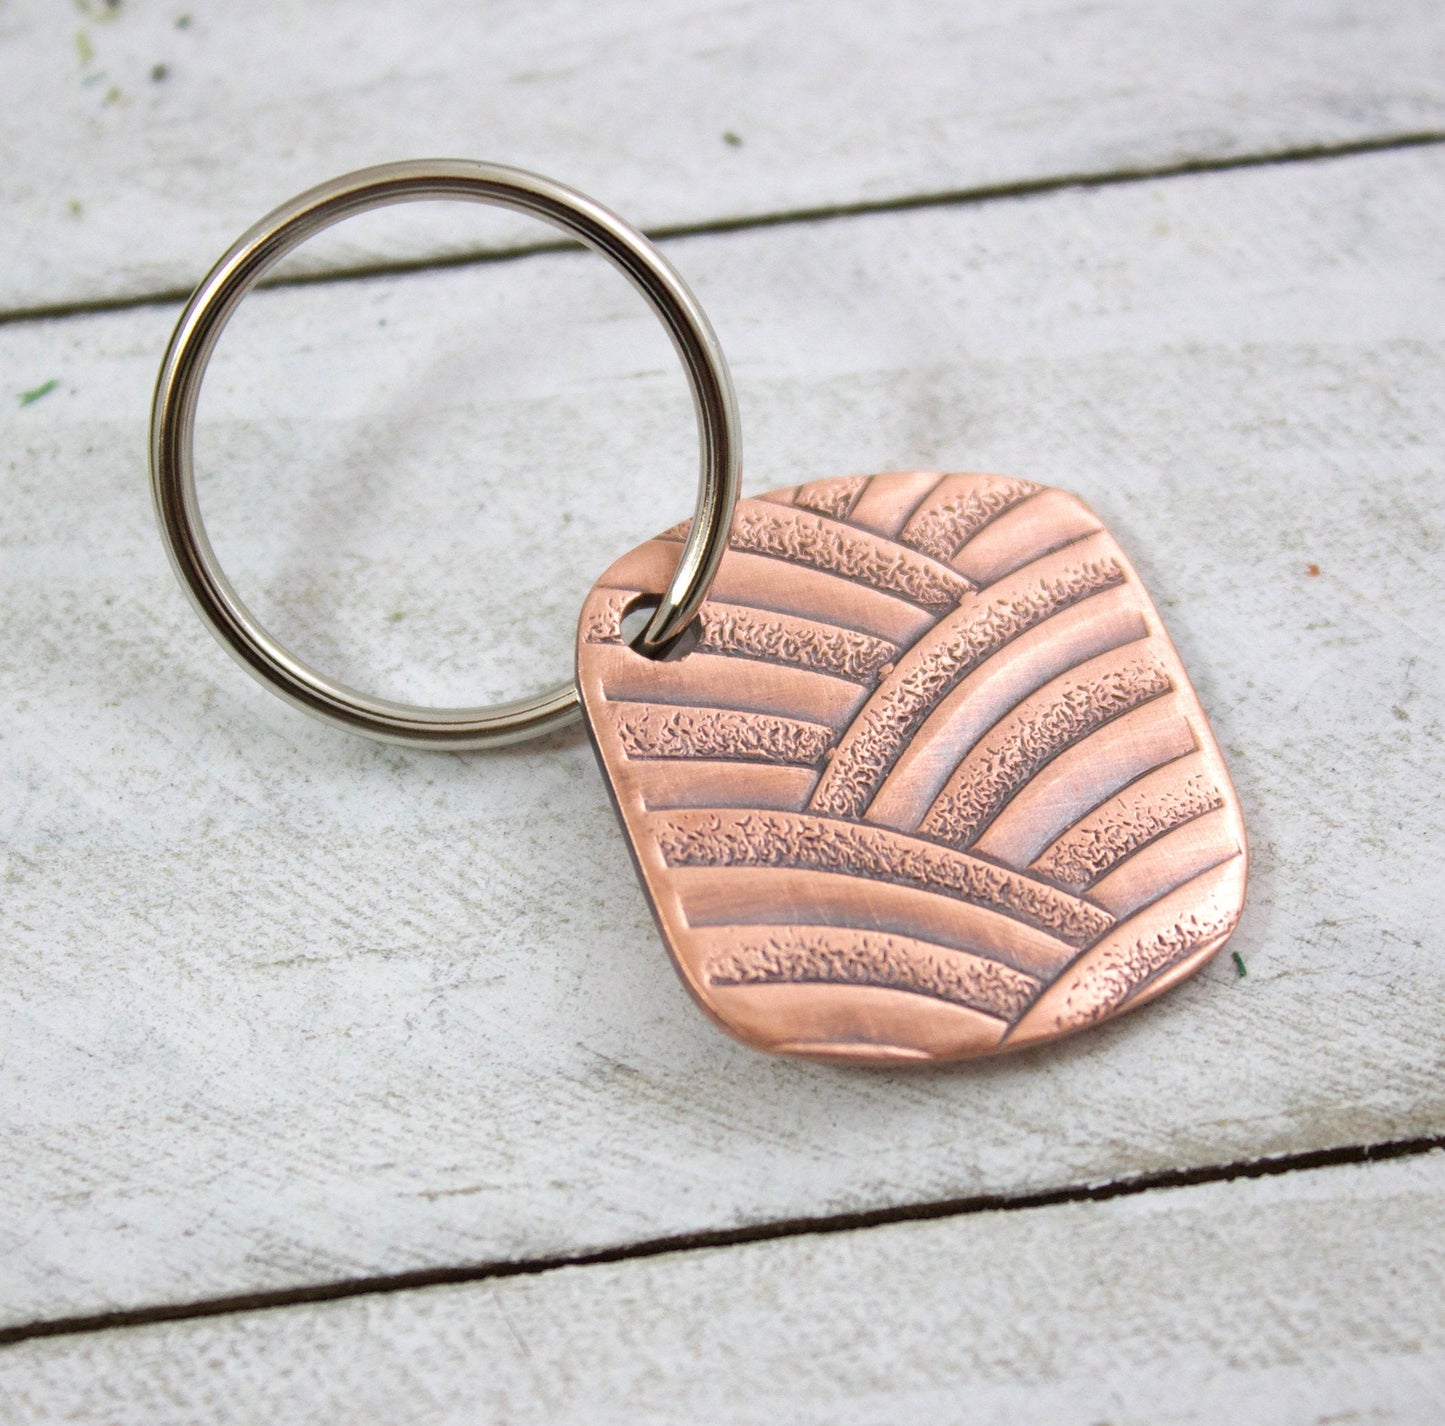 Copper keychain with a textured pattern of overlapping arches. Square with softly rounded corners.